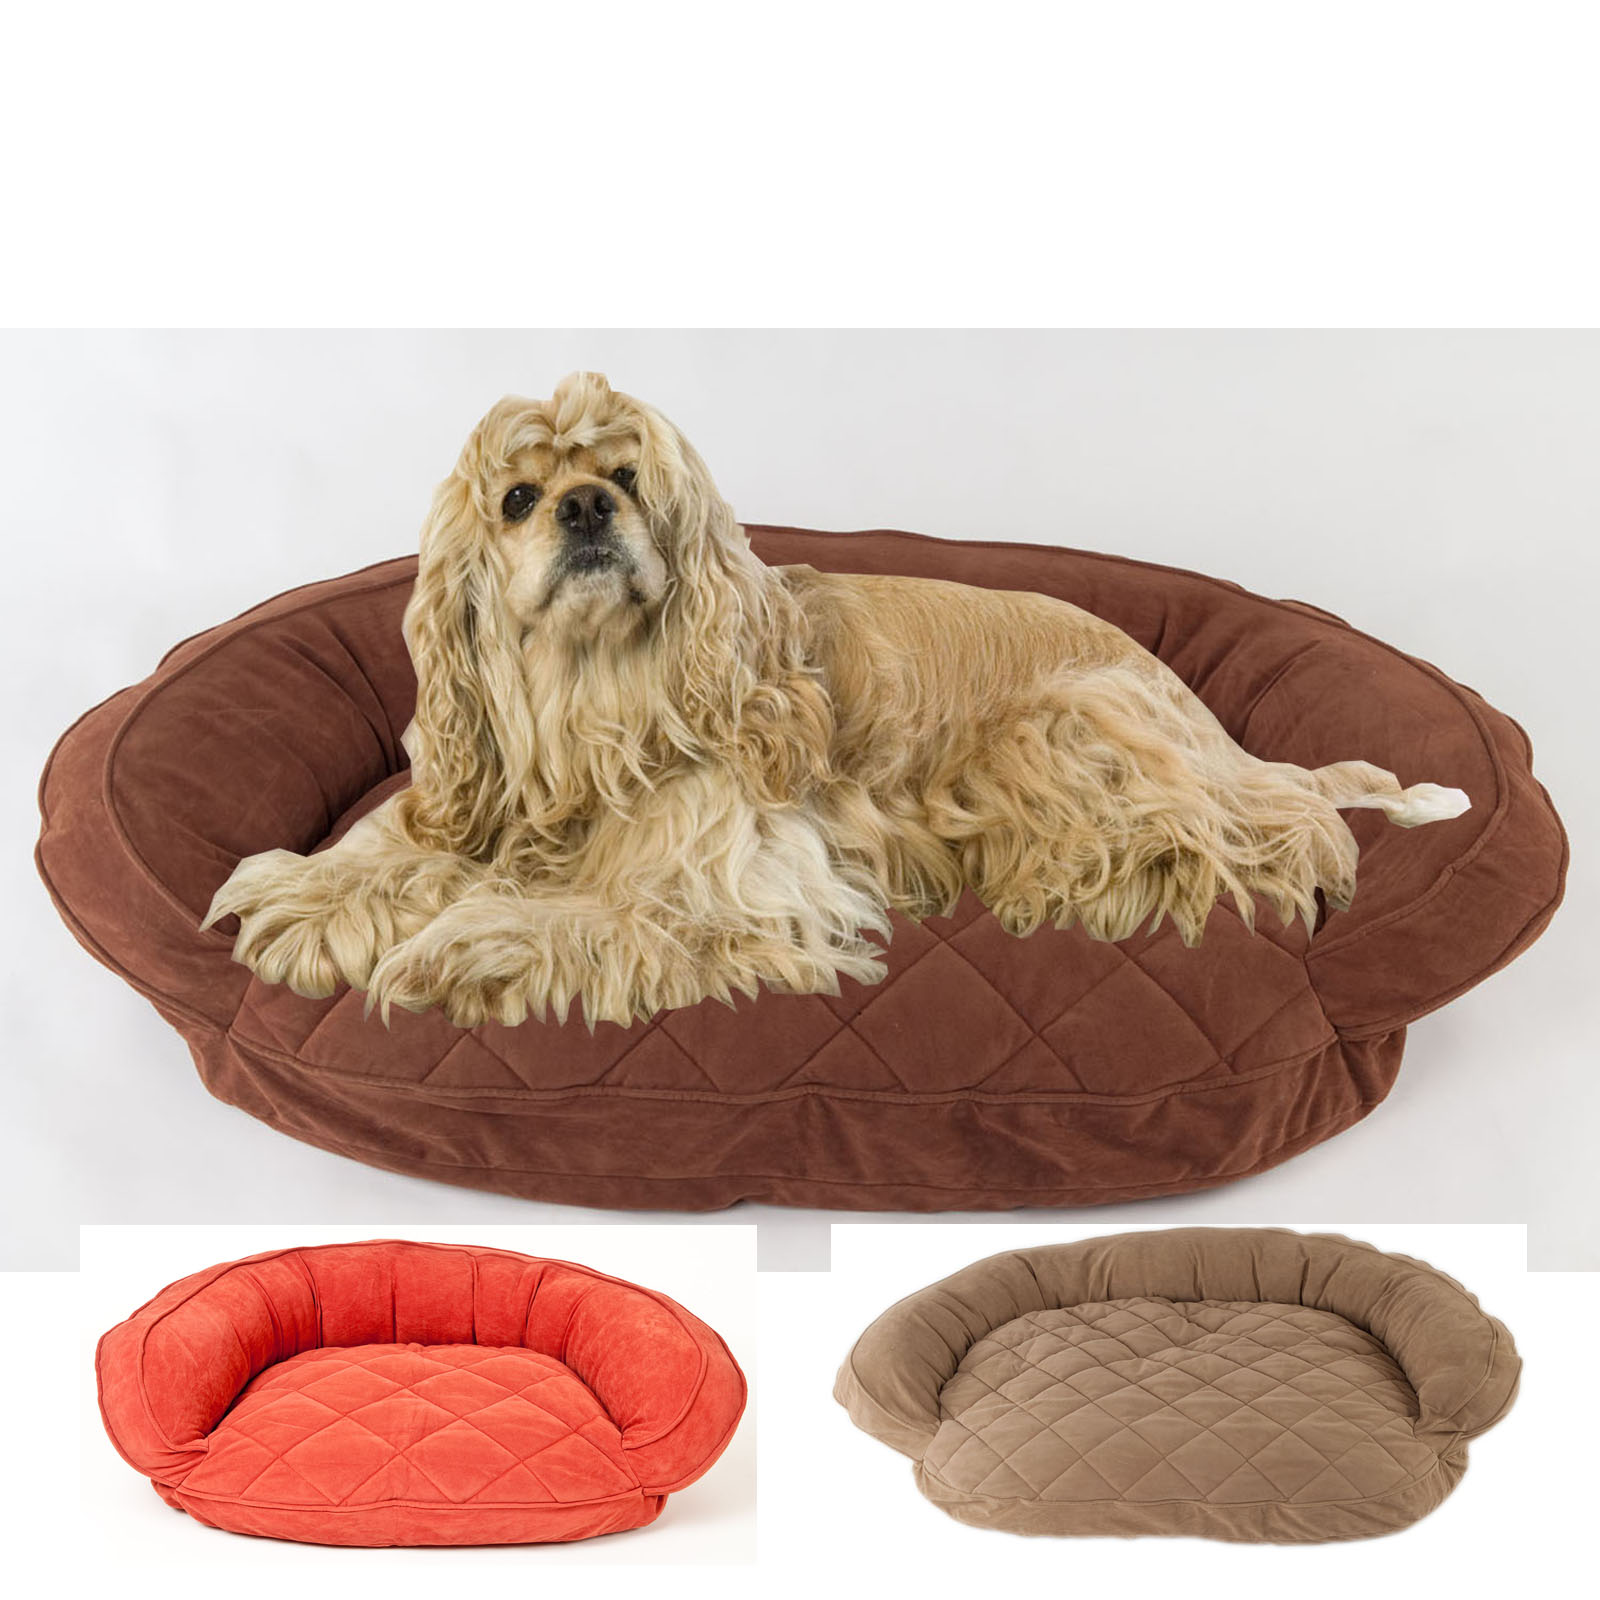 Carolina Pet Company Medium Microfiber Quilted Bolster Bed with Moister Barrier